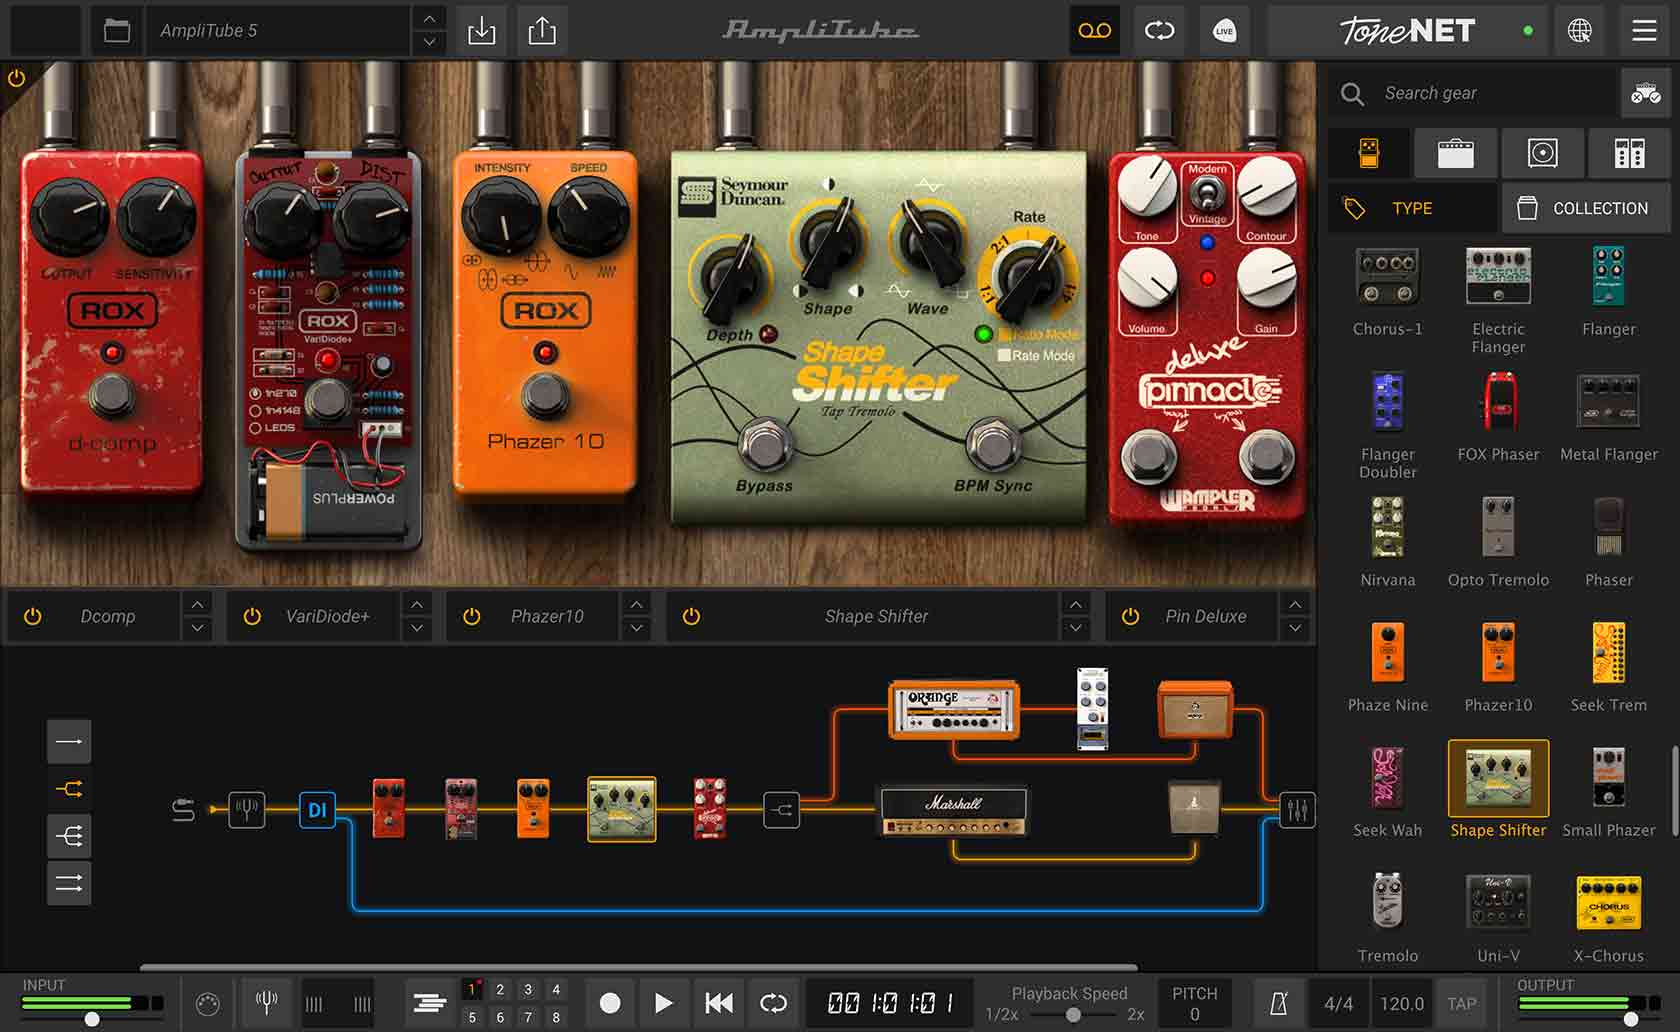 AmpliTube 5 amp simulation and guitar gear modeling software